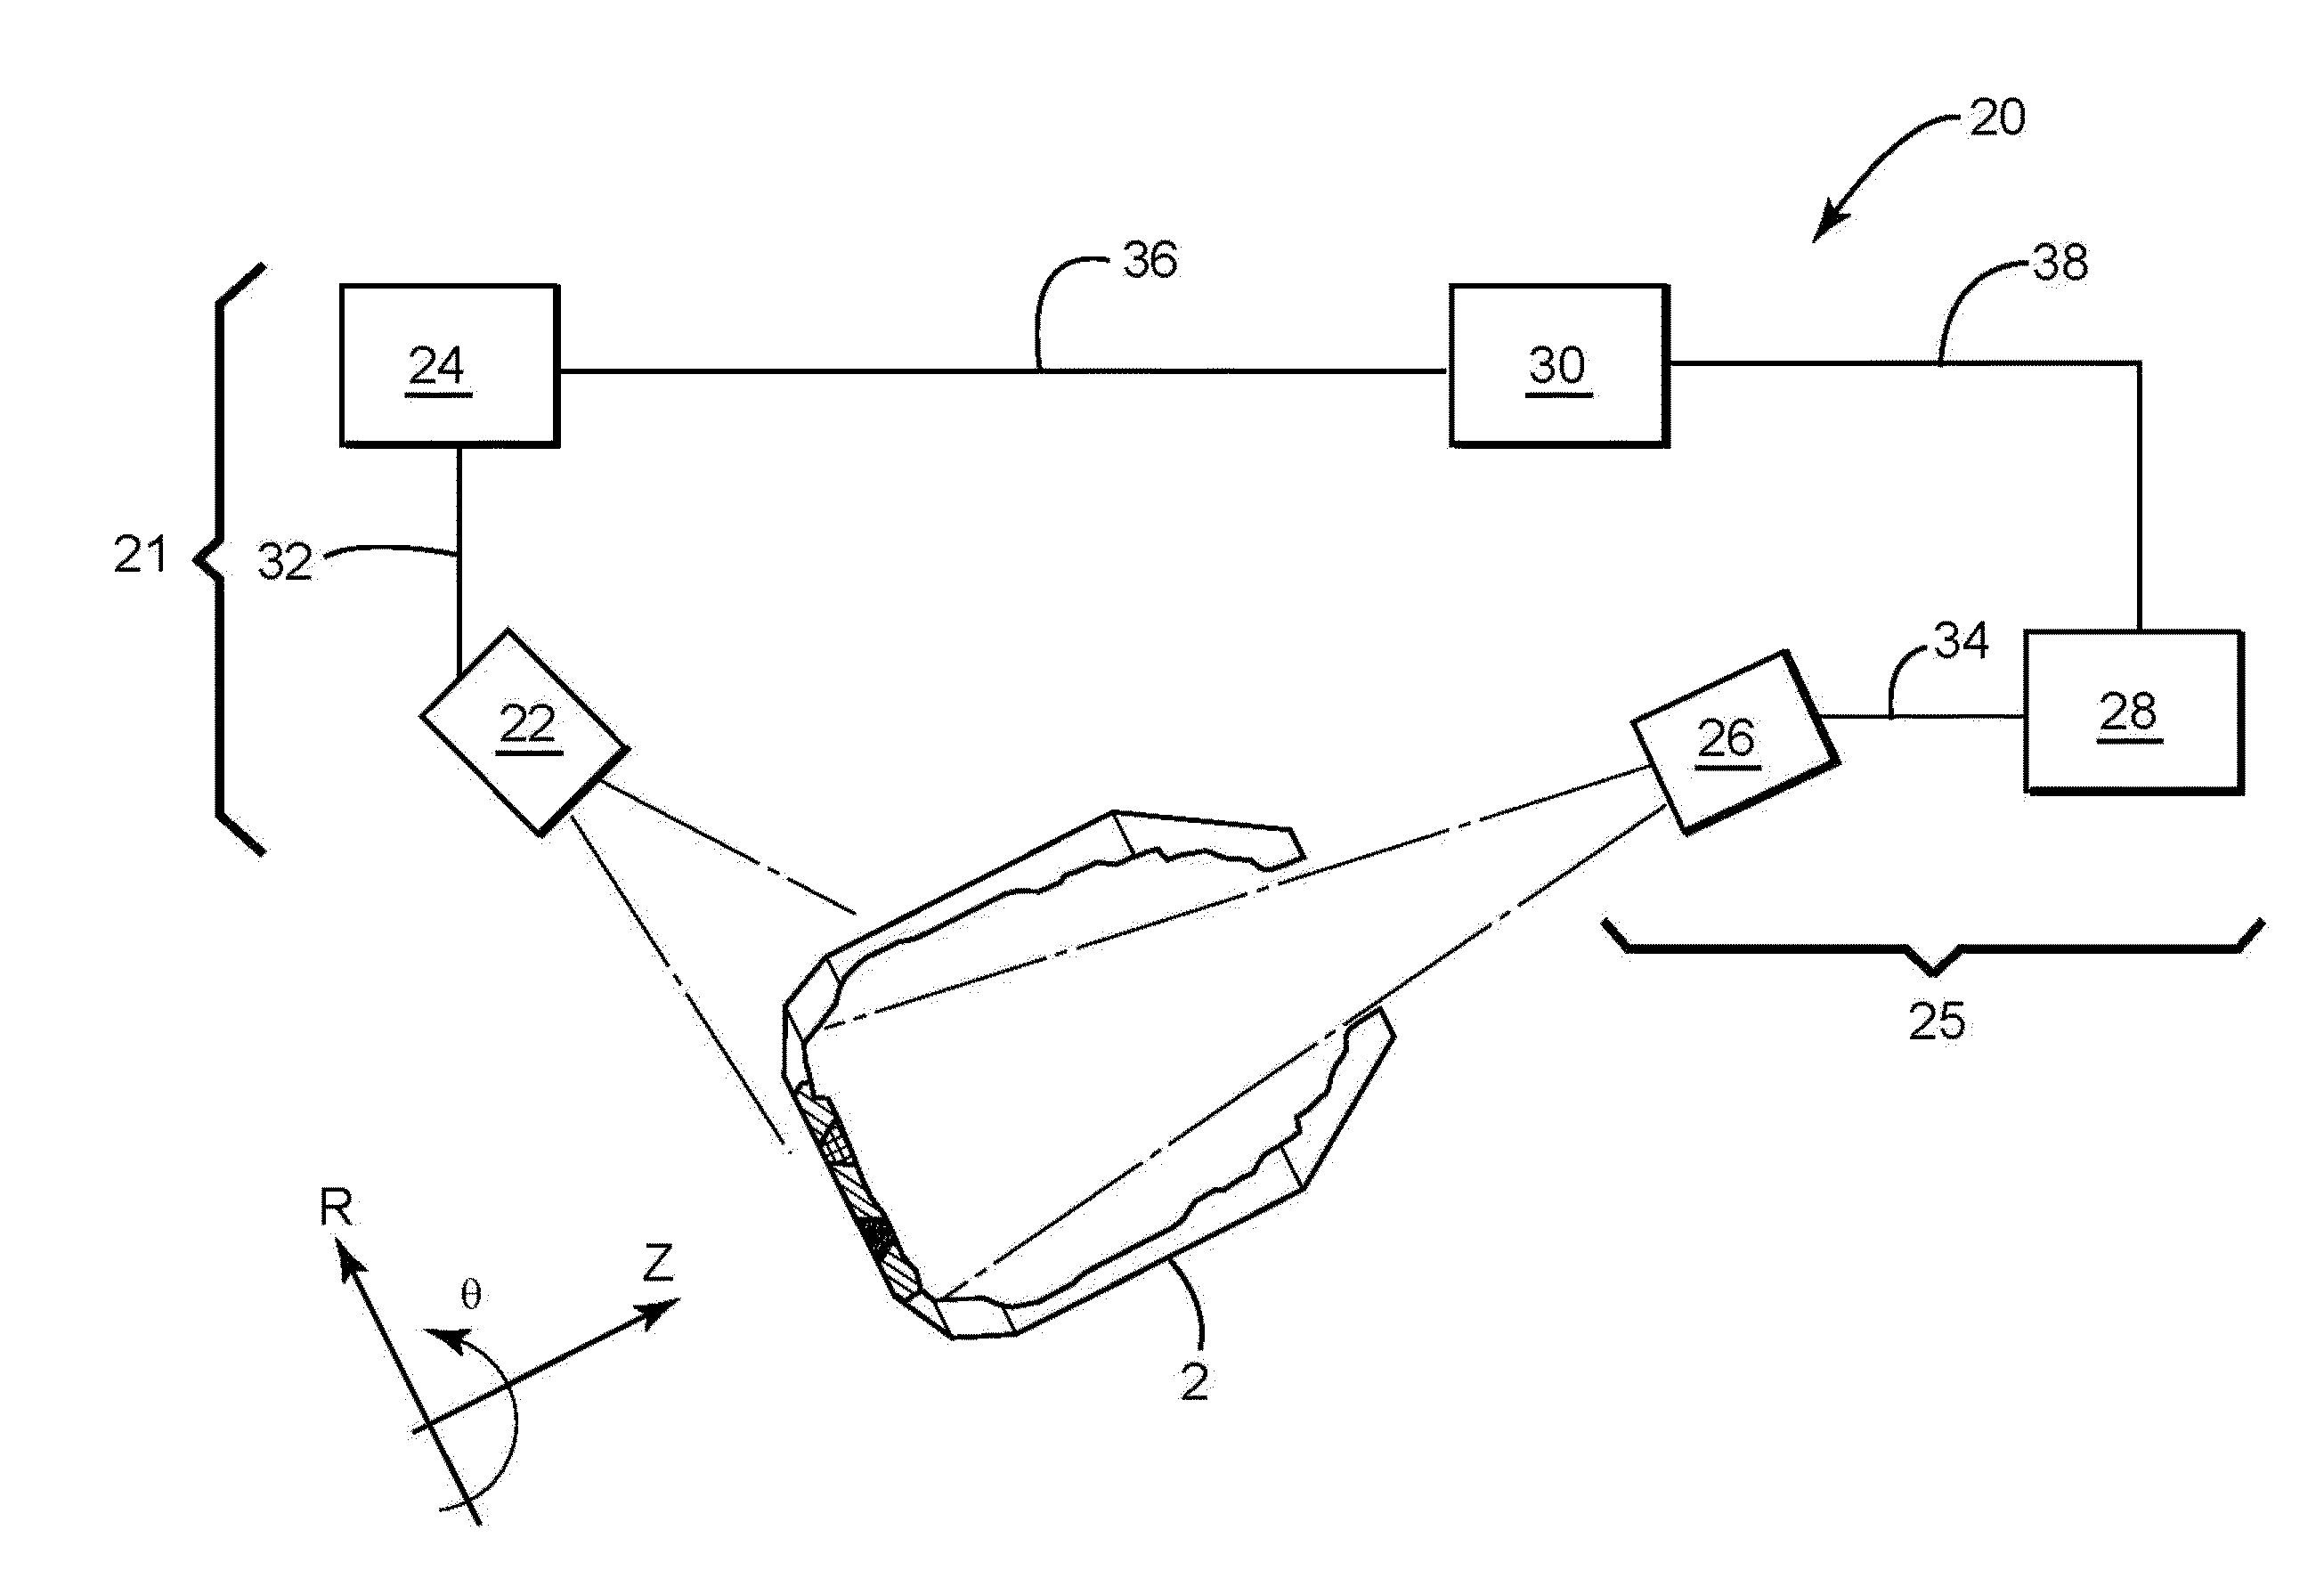 Apparatus, process, and system for monitoring the integrity of containers